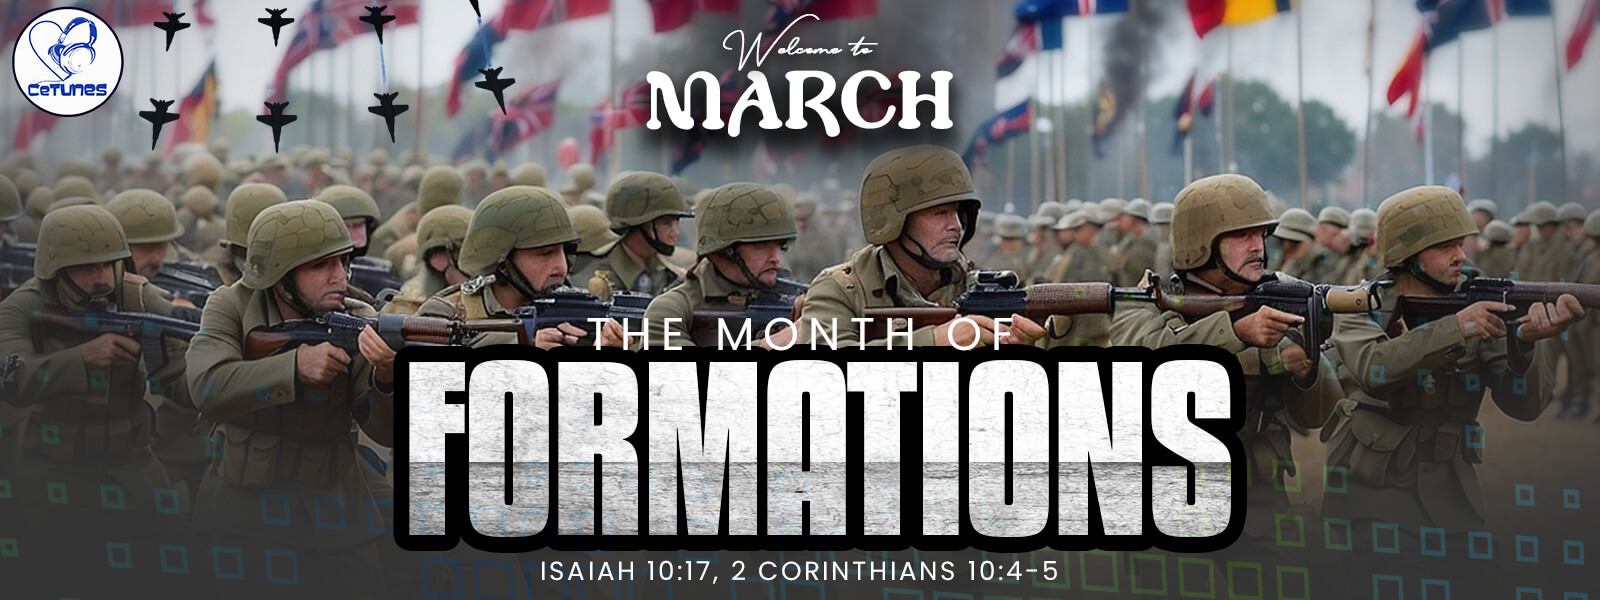 MARCH IS THE MONTH OF FORMATION